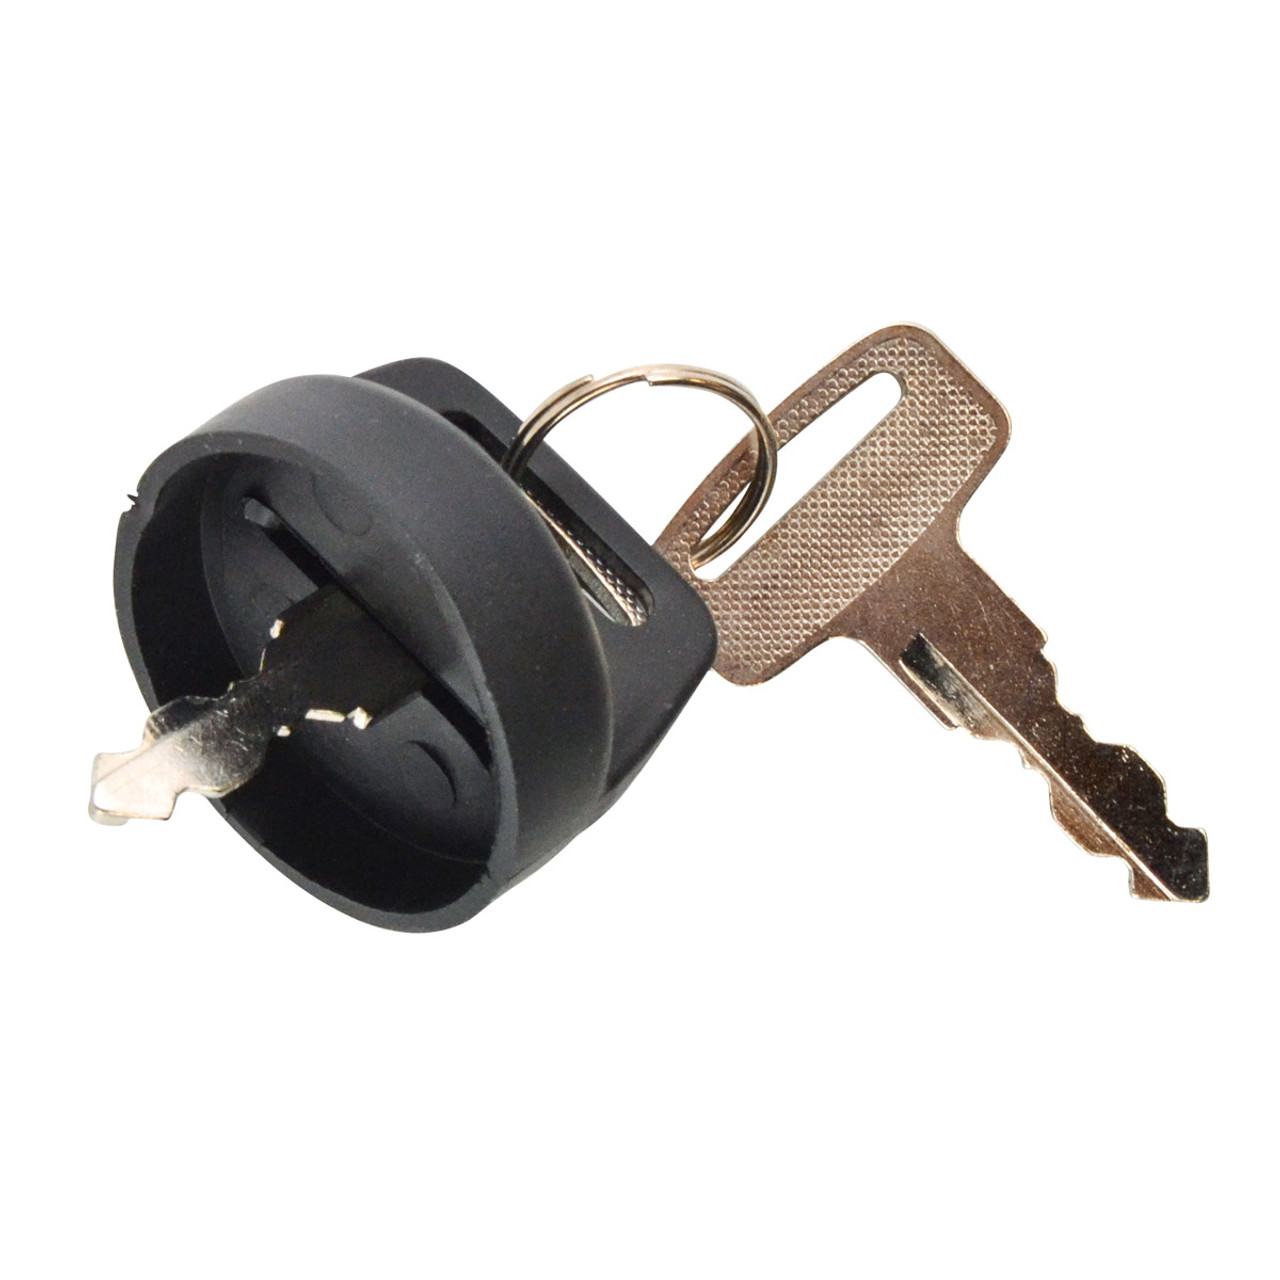 RMSTATOR New Aftermarket Polaris 2-Position Ignition Key Switch, RM05022